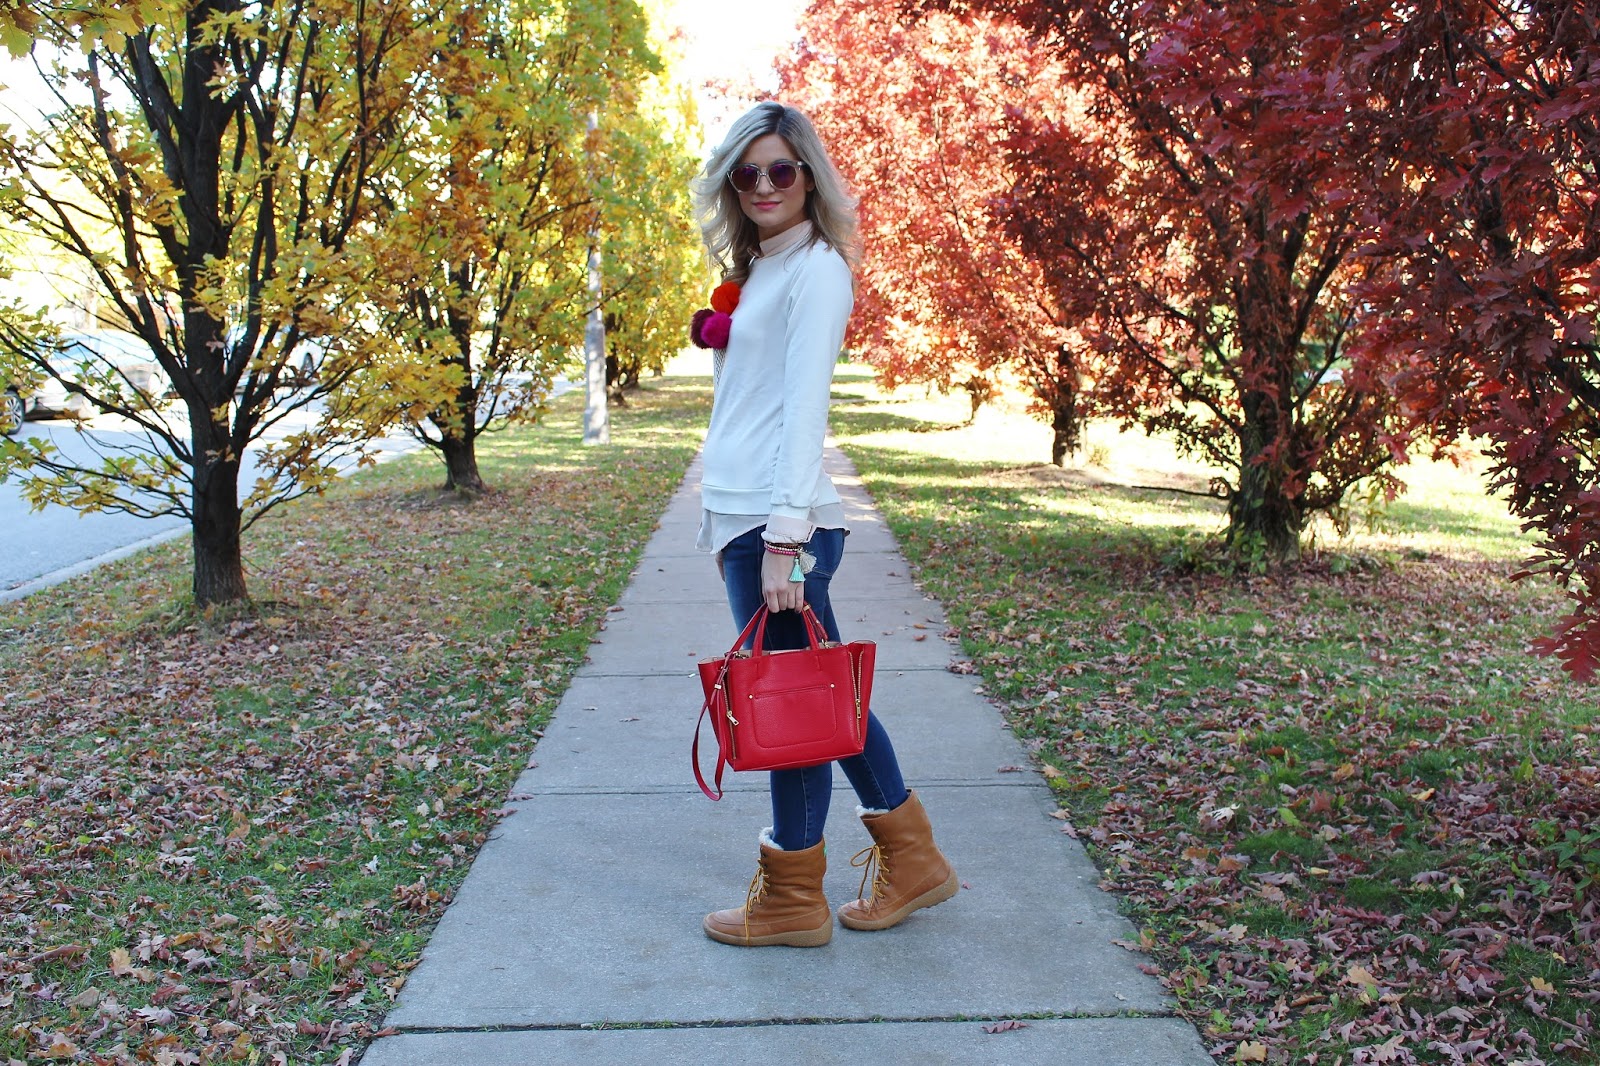 Bijuleni - Pom Pom Icecream Top and Fidelity Denim jeans with Cougar boots and Ann Taylor red tote